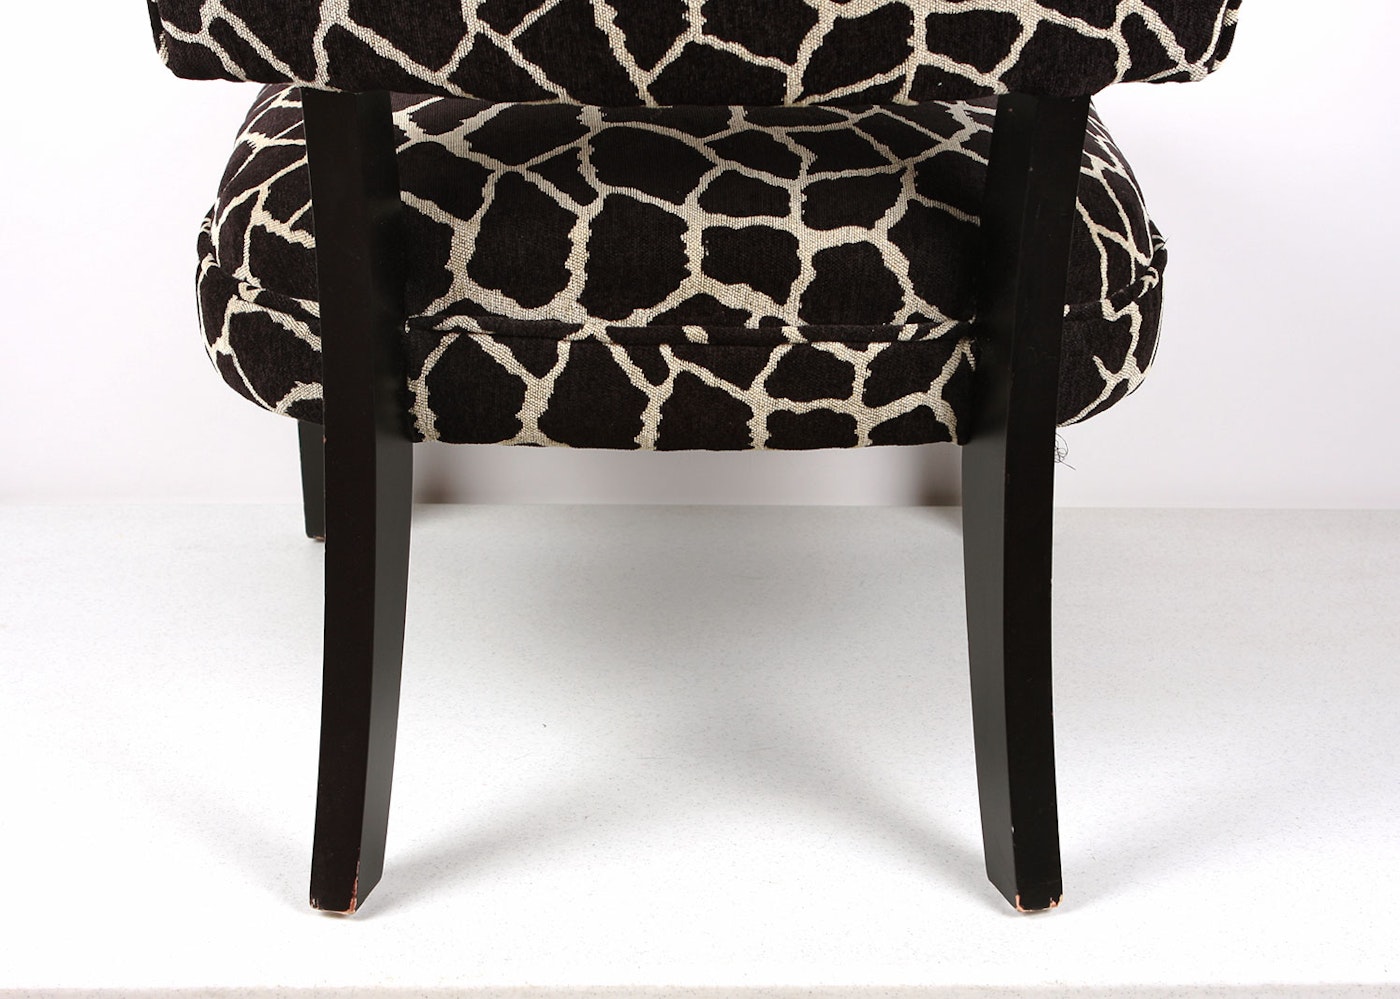 Black and White Giraffe Print Upholstered Accent Chair EBTH